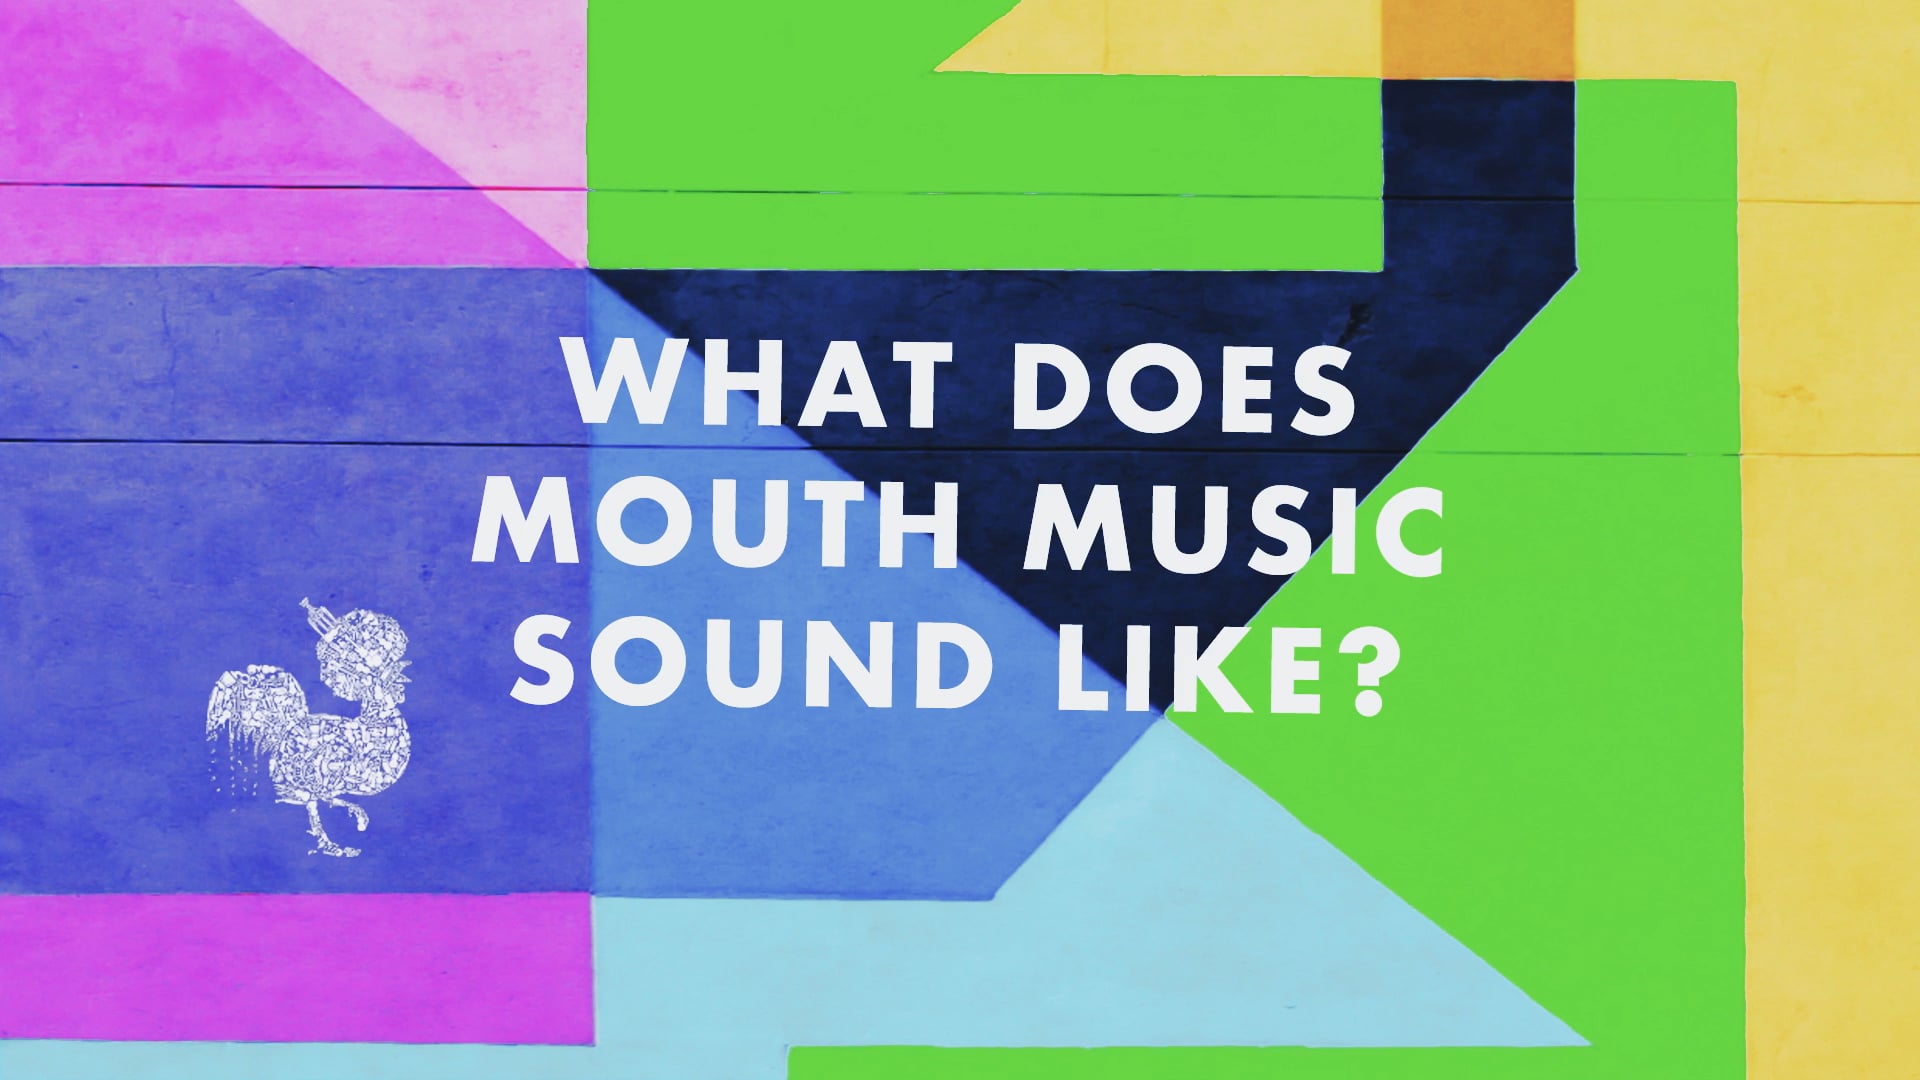 South African National Youth Orchestra & Bombshelter Beast - PSA - What is mouth music?